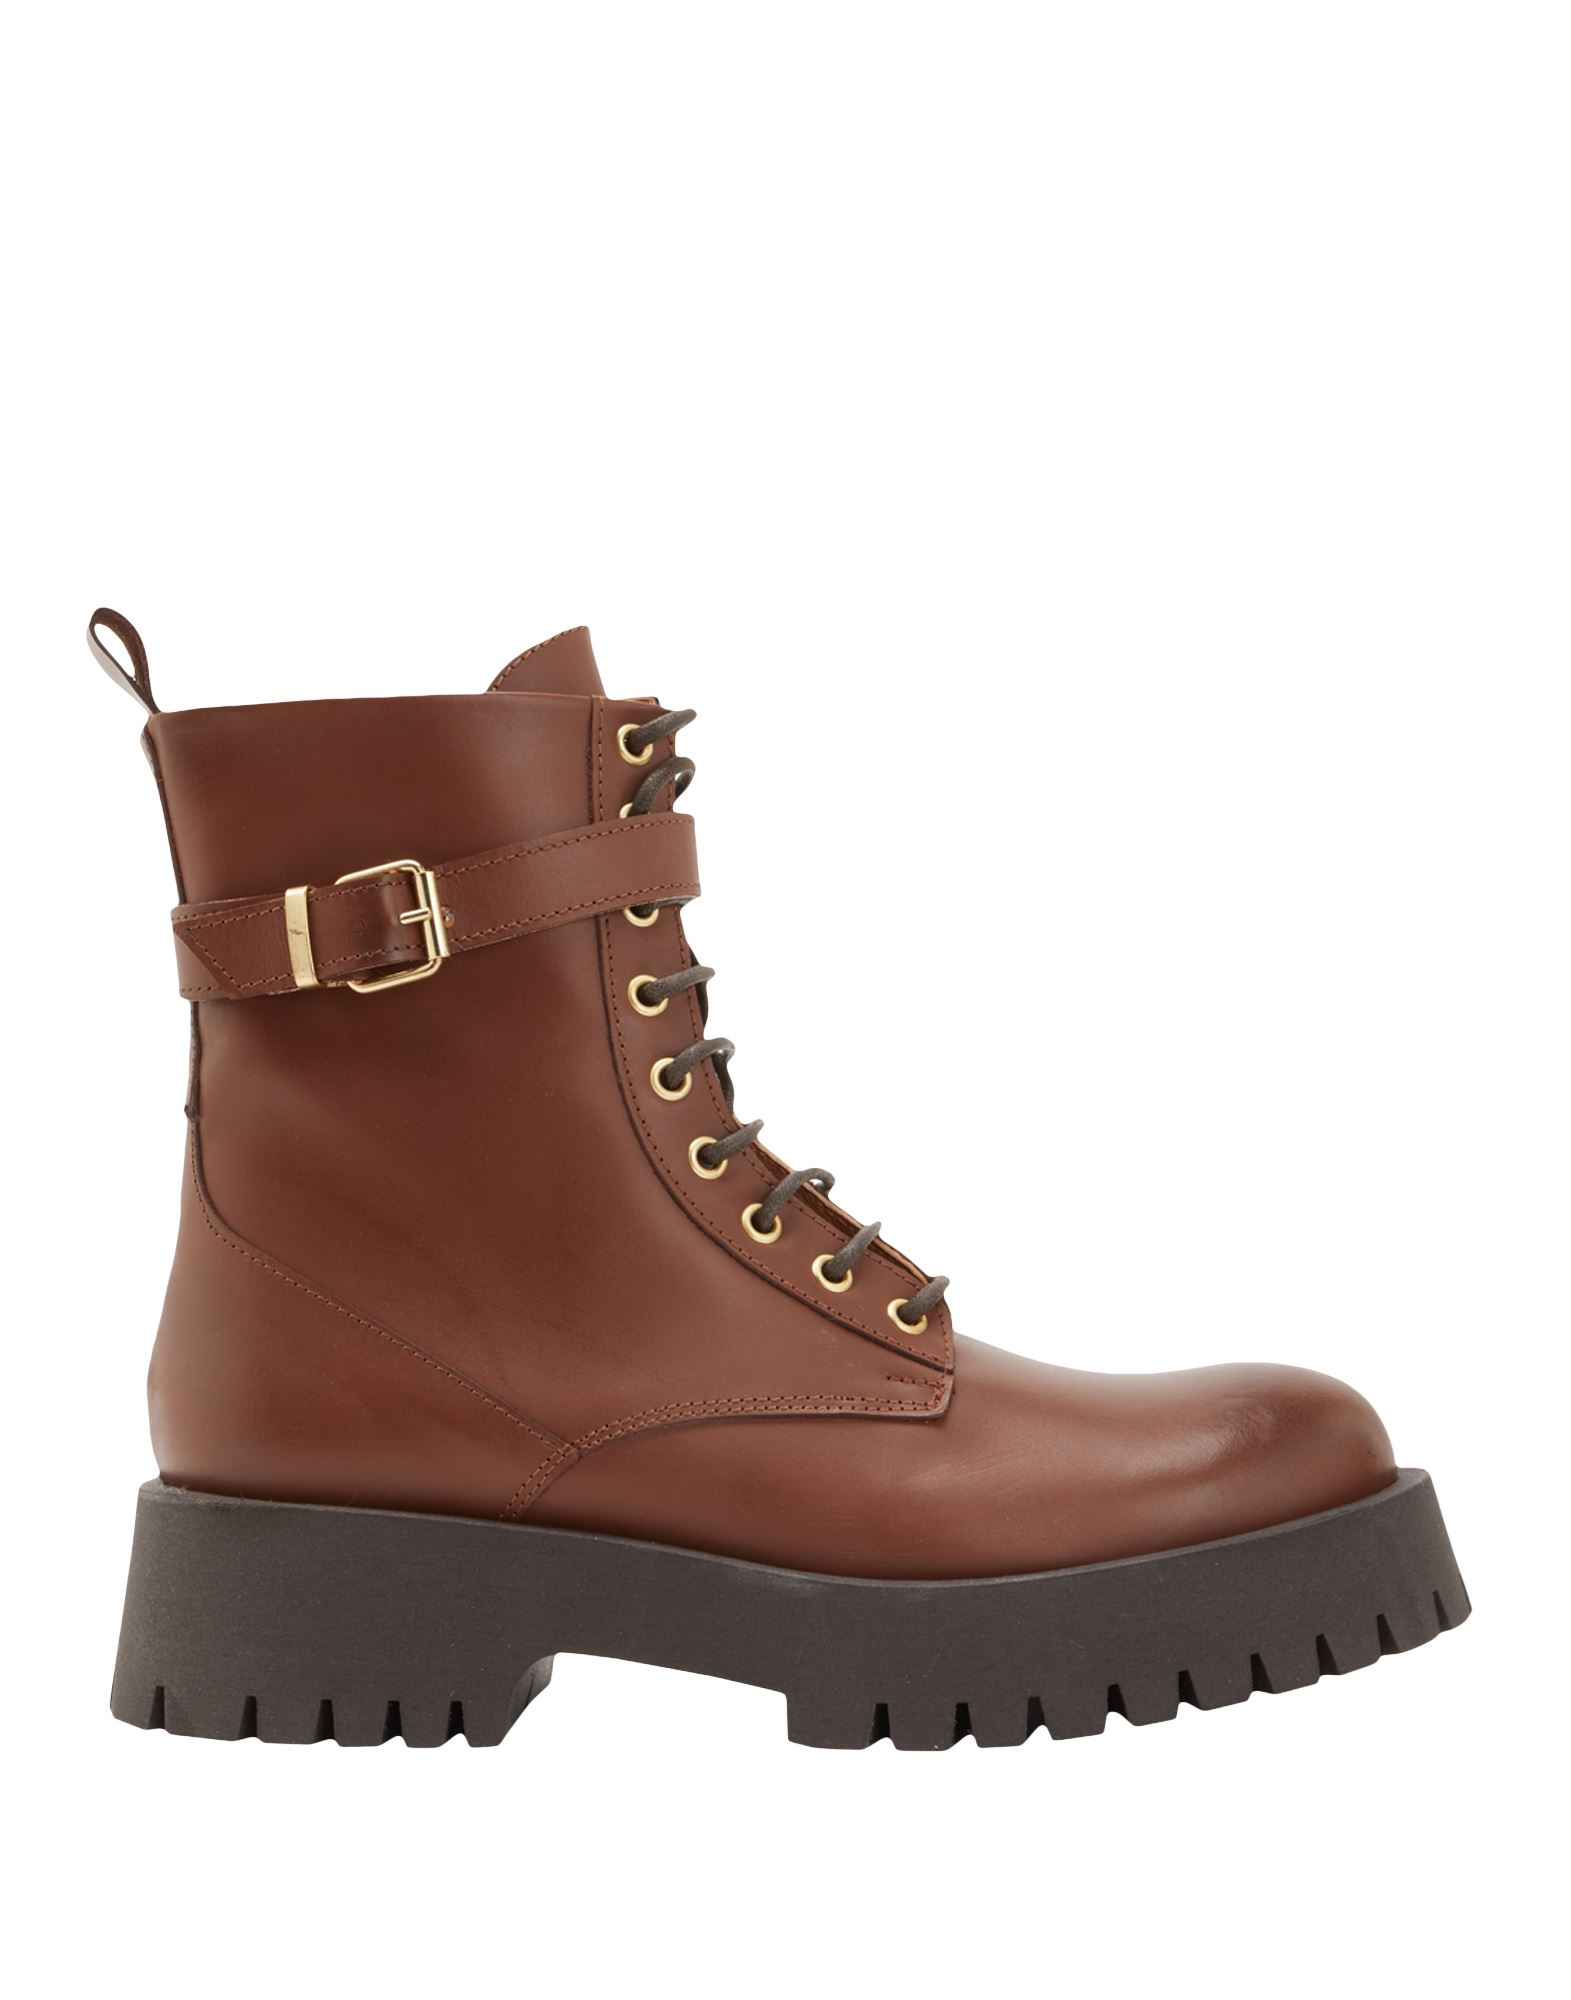 8 By Yoox Ankle Boots In Brown